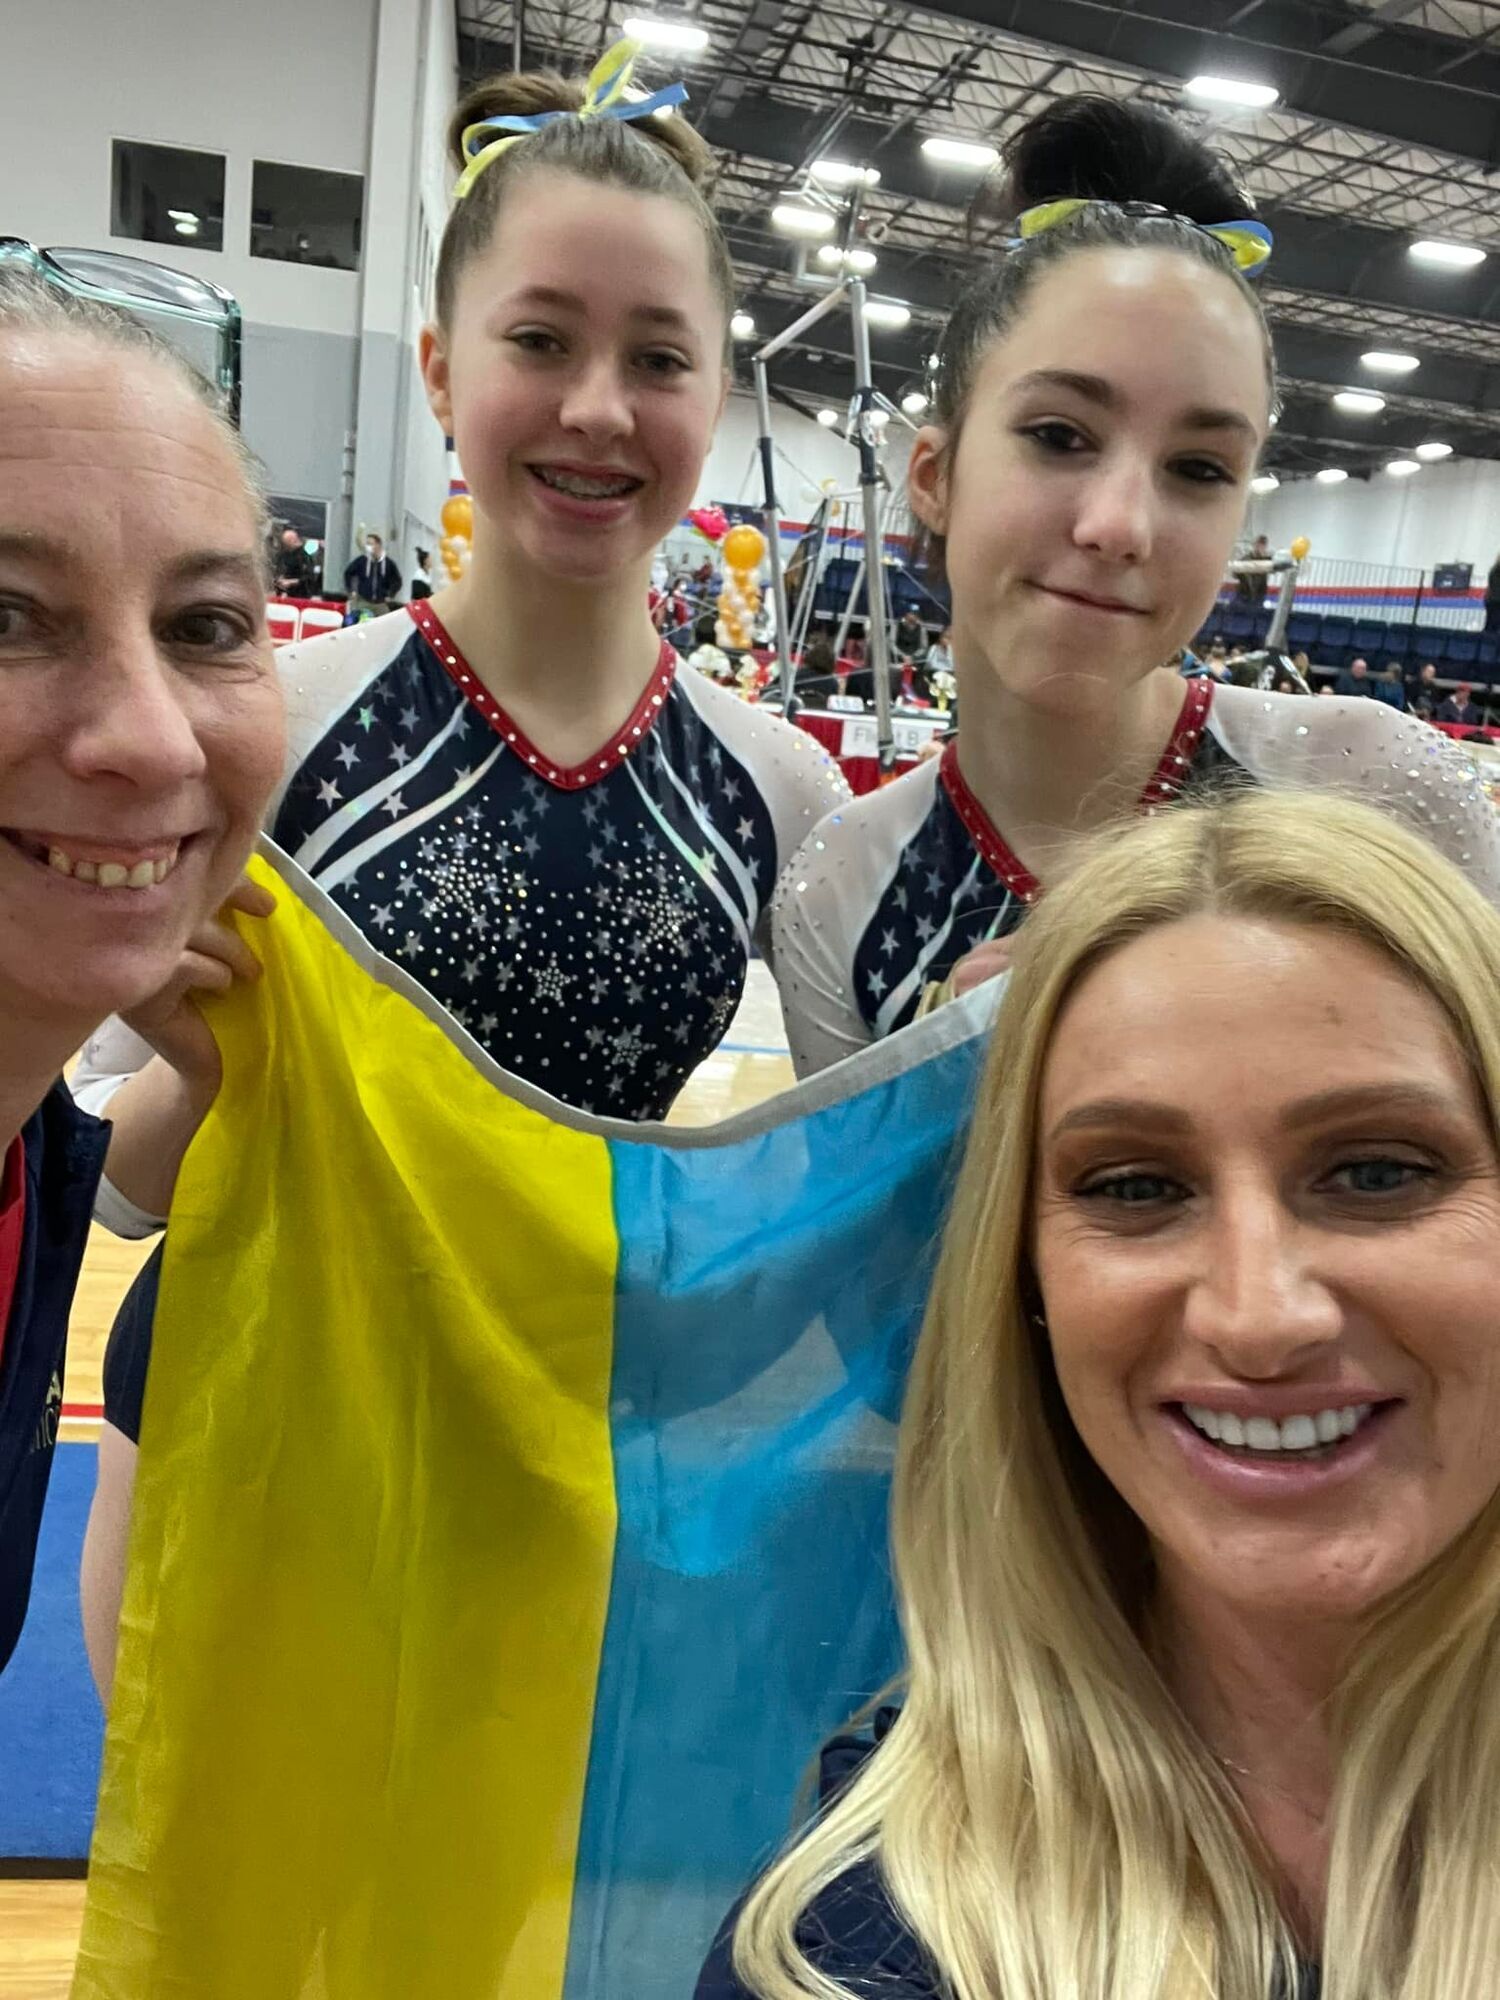 Survived rape in the USSR and raised the flag of Ukraine at the Olympic Games-1992: how the famous gymnast living in the USA has changed